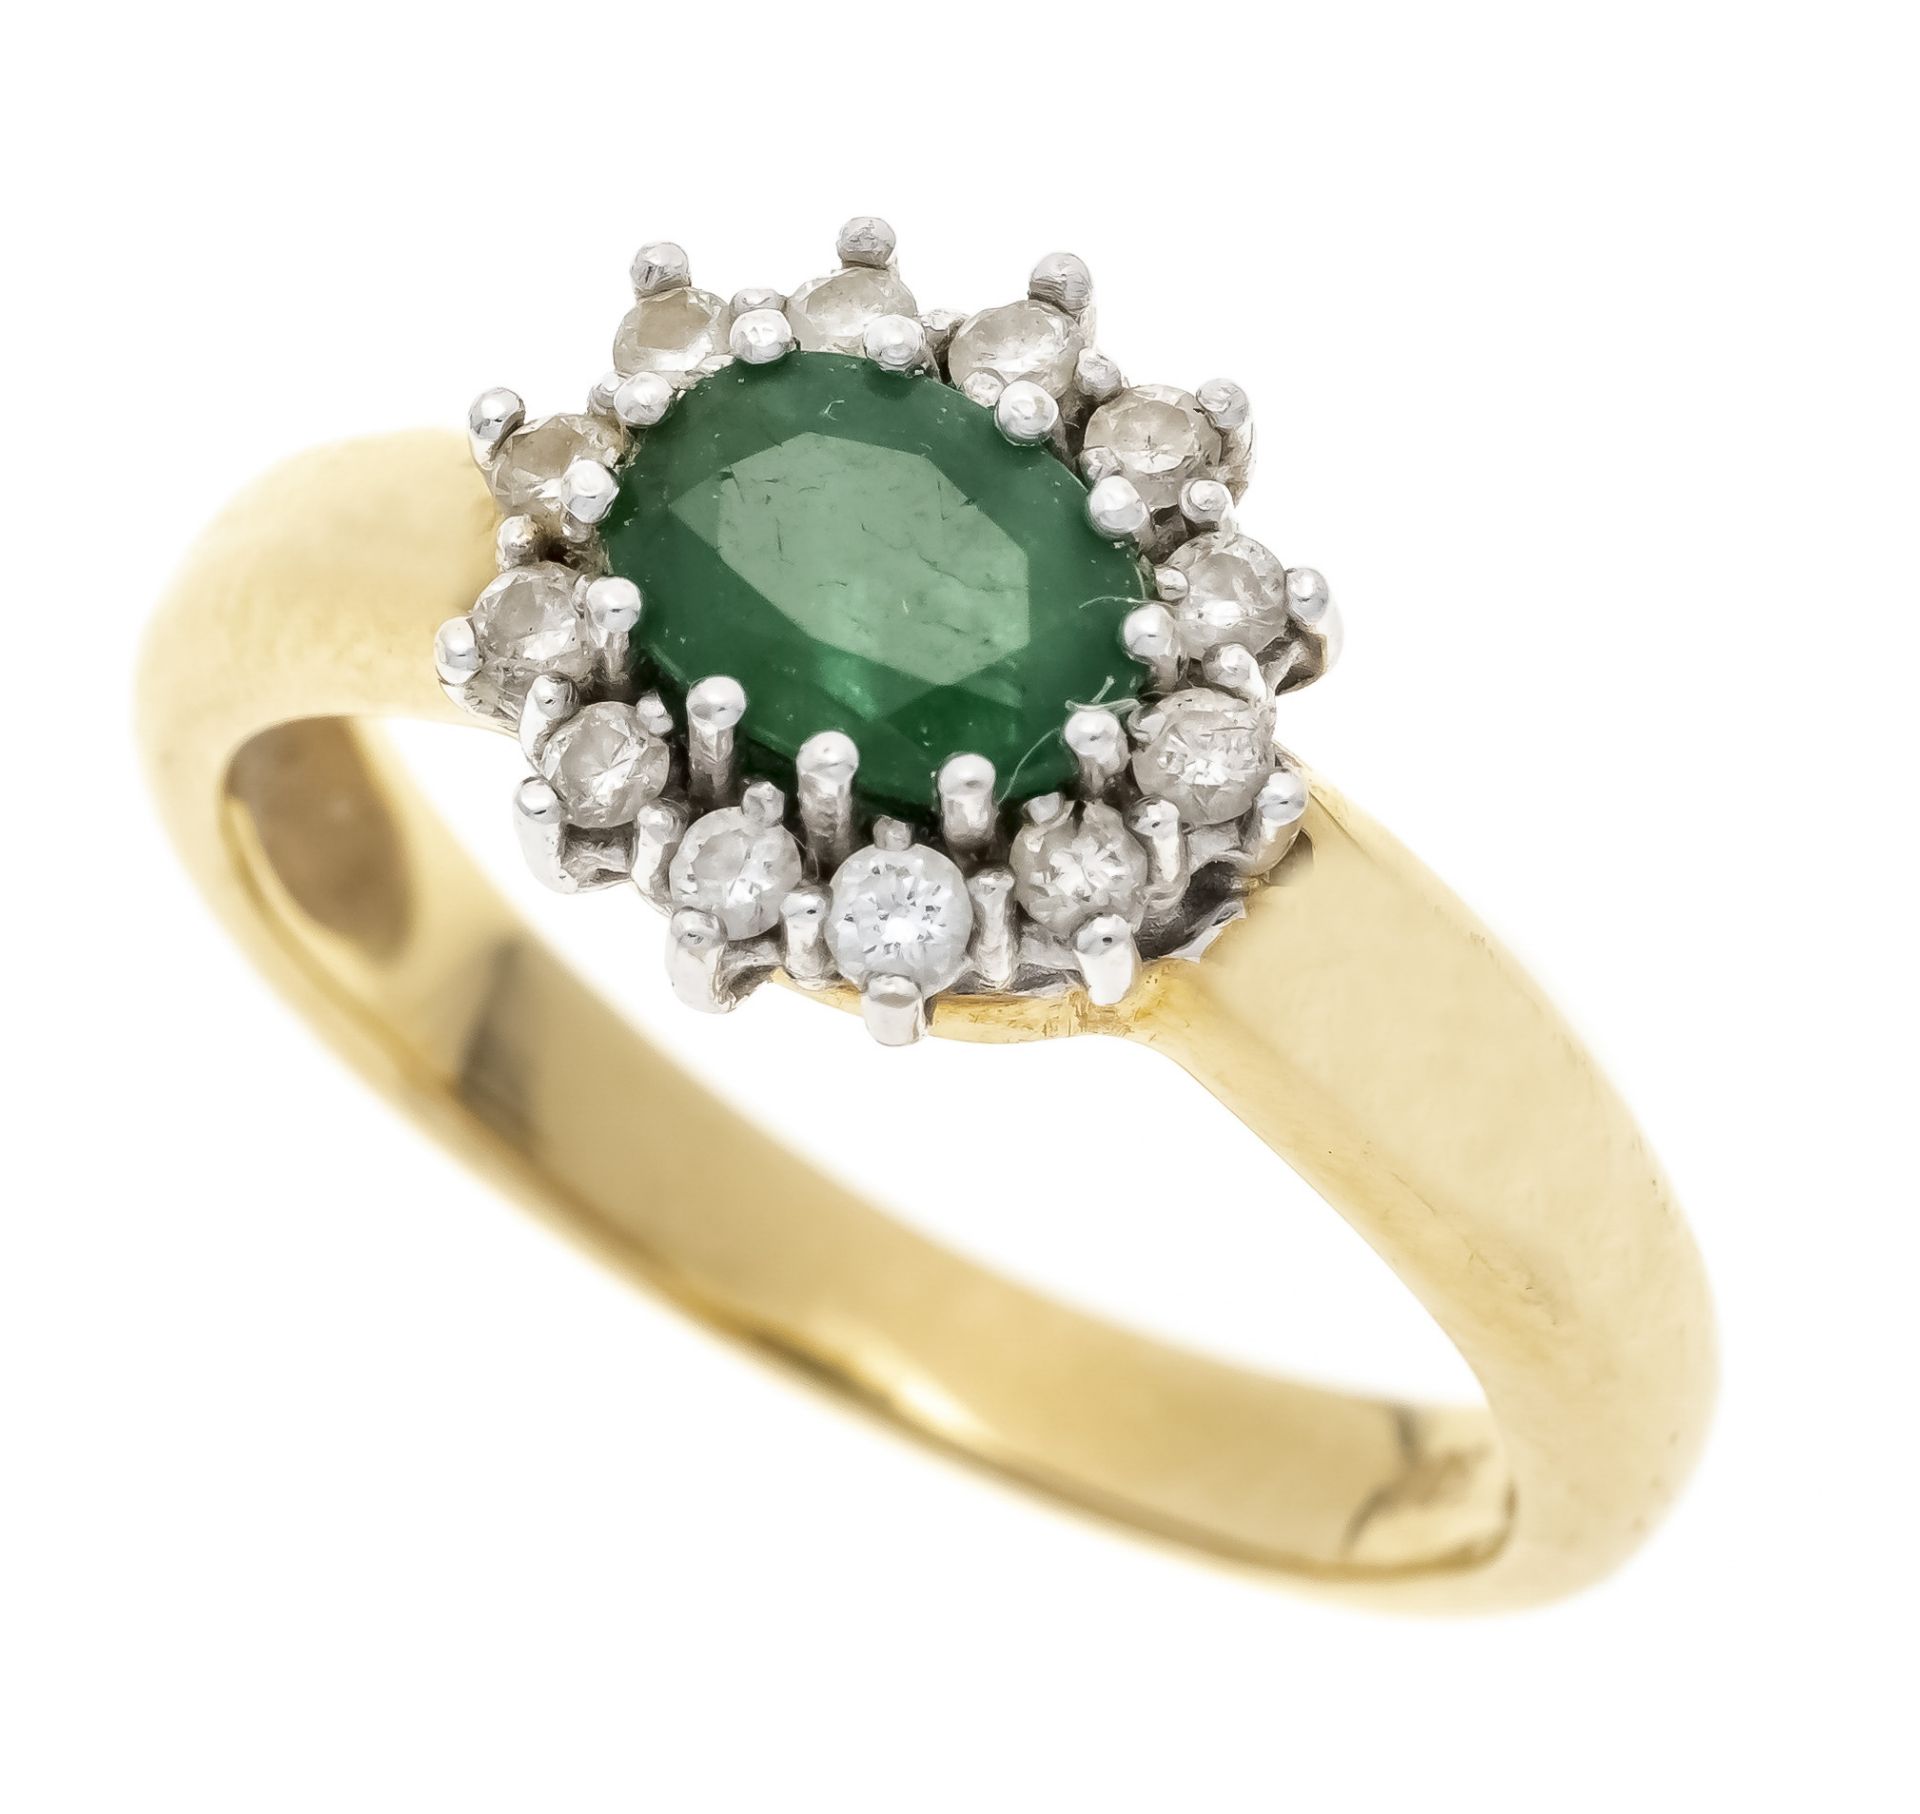 Emerald and brilliant-cut diamond ring GG/WG 585/000 with an oval faceted emerald 6.4 x 4.7 mm